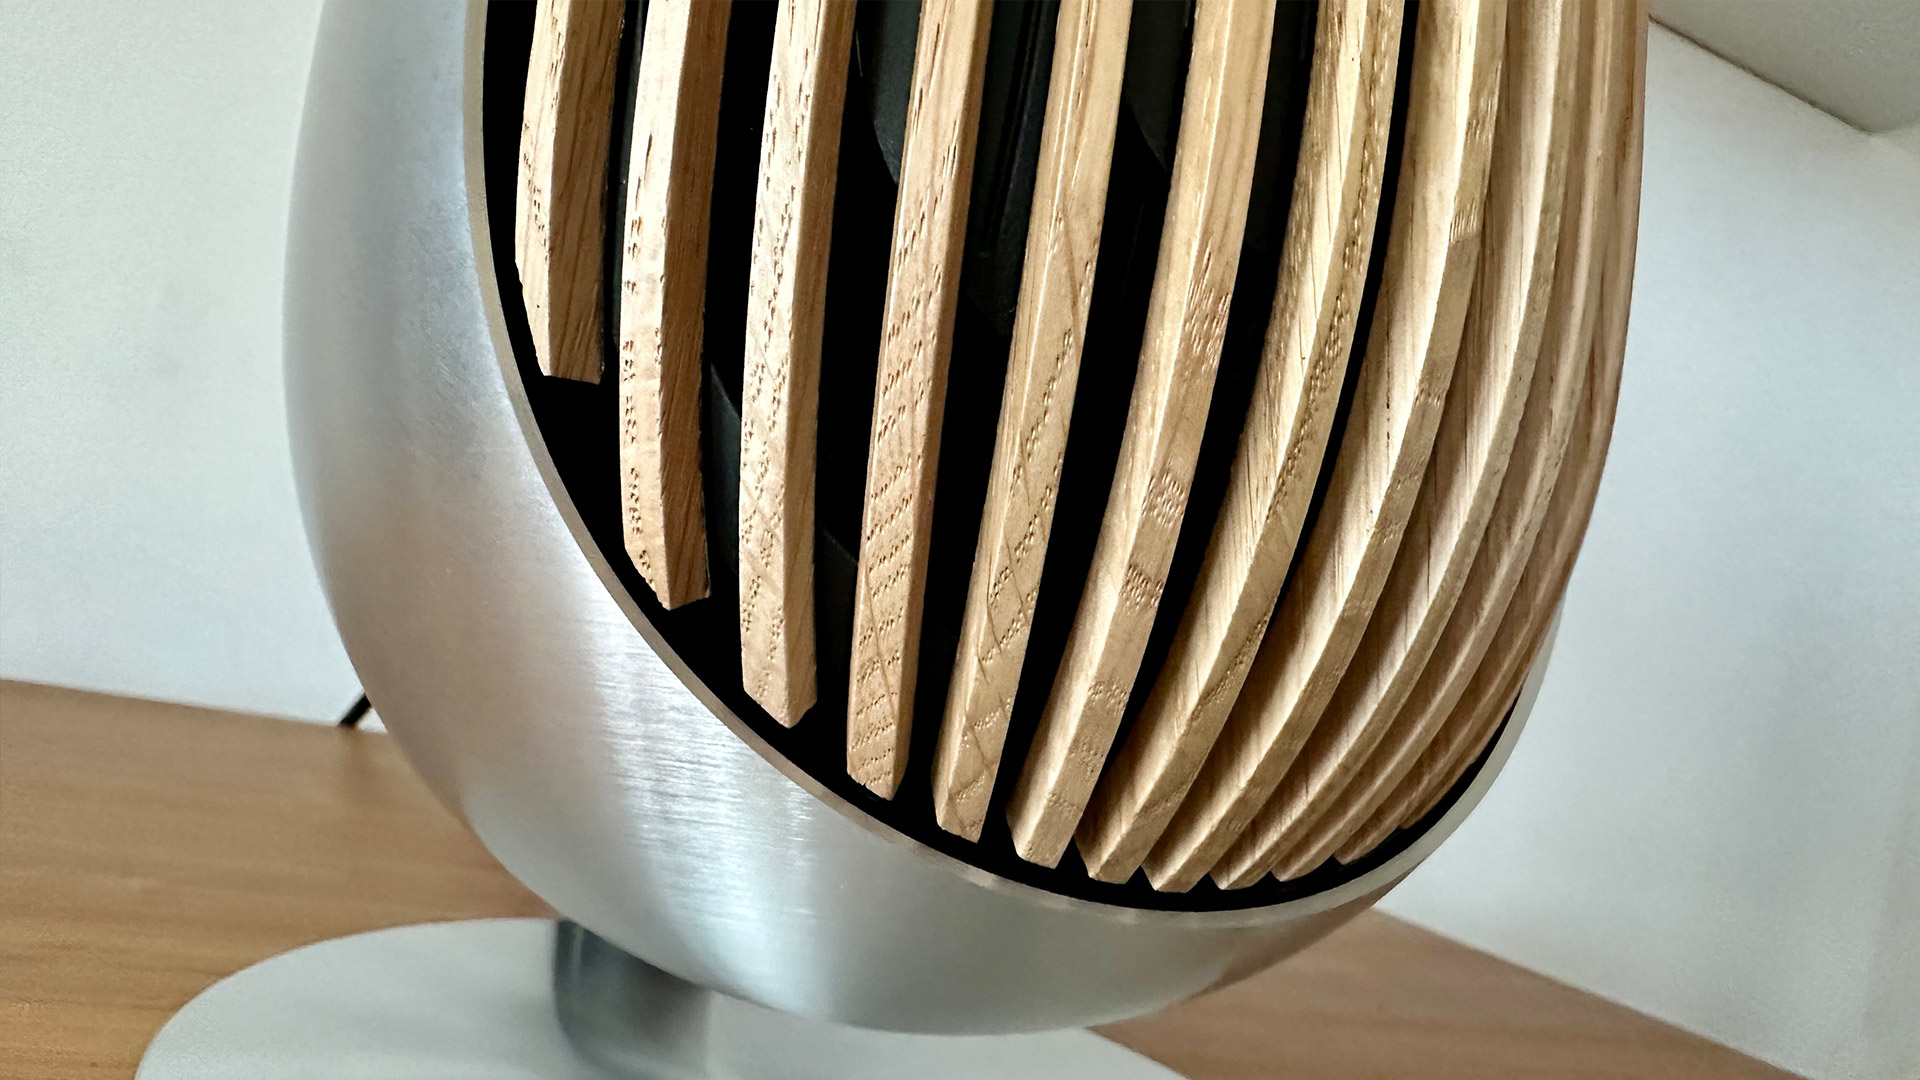 A close-up of the Bang & Olufsen Beolab 8